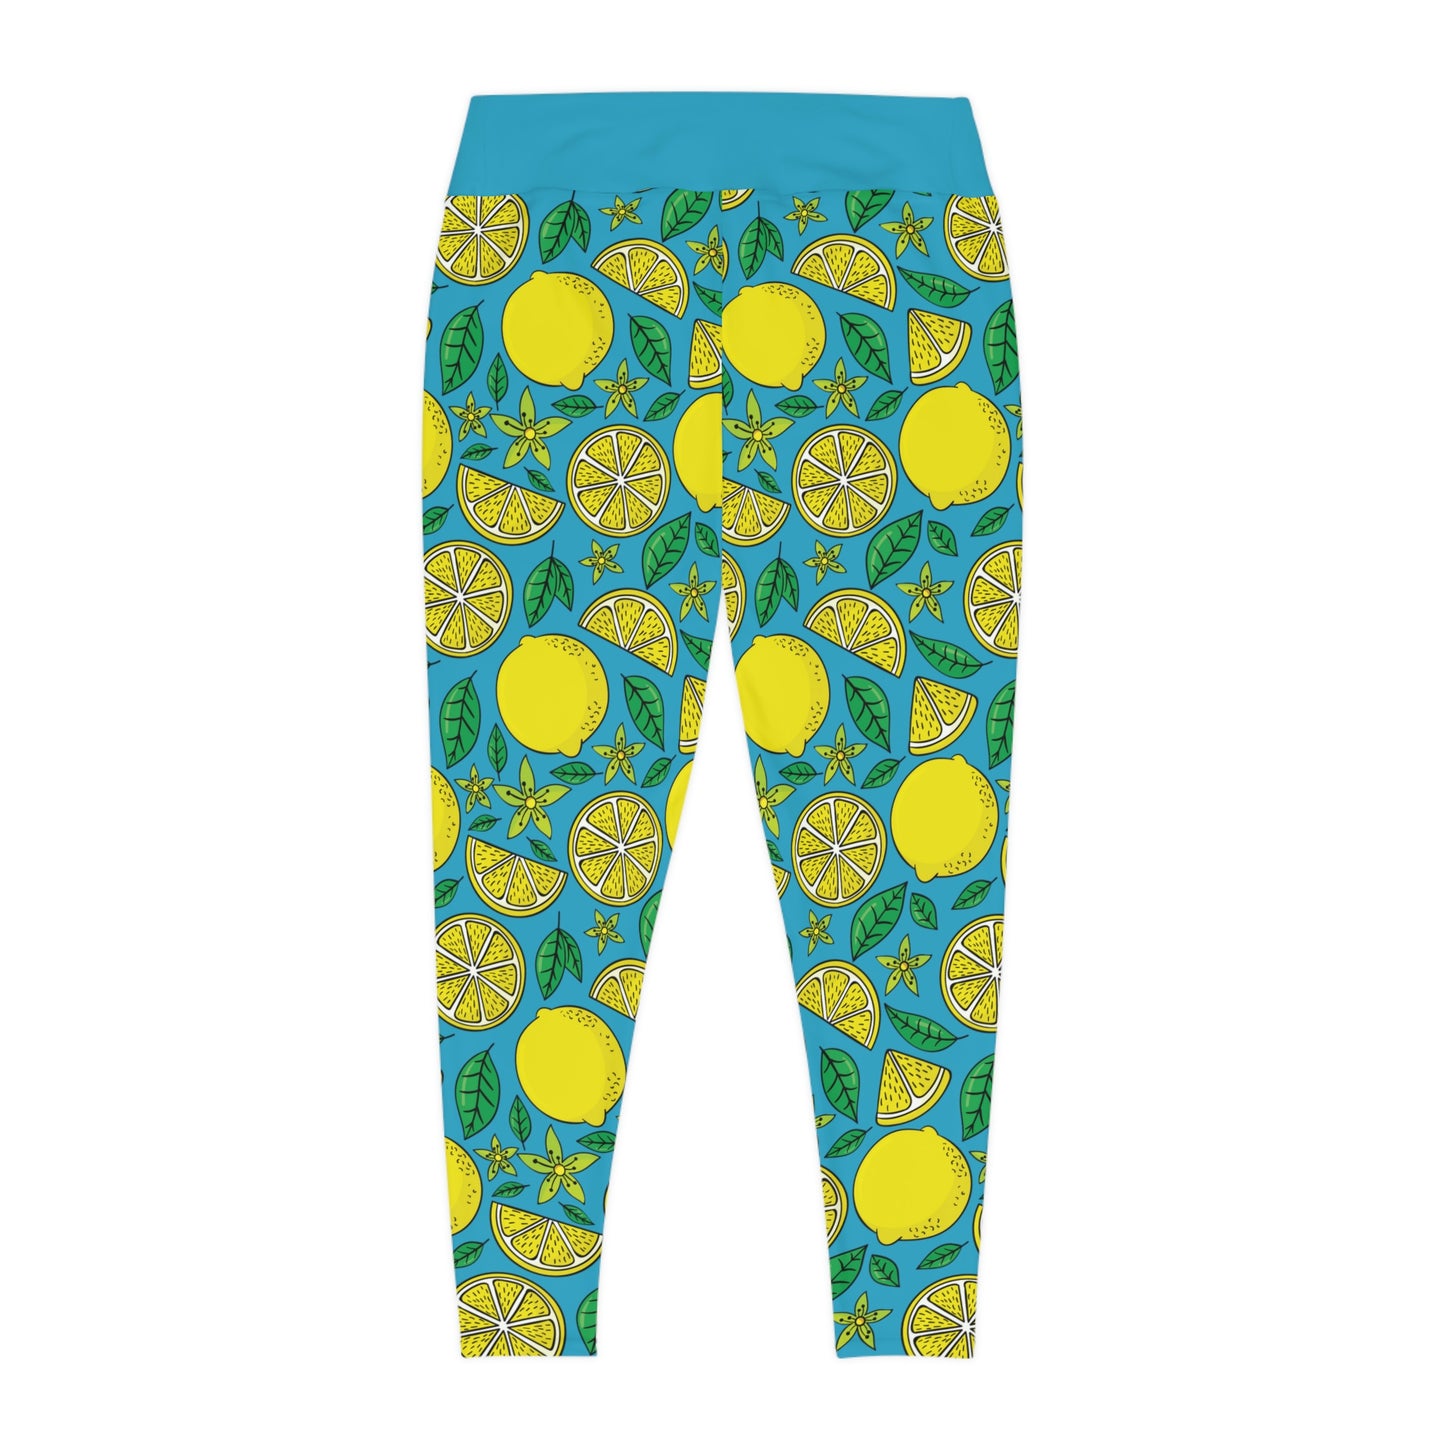 Lemon Summer Plus Size Leggings One of a Kind Gift - Unique Workout Activewear tights for Mom fitness, Mothers Day, Girlfriend Christmas Gift